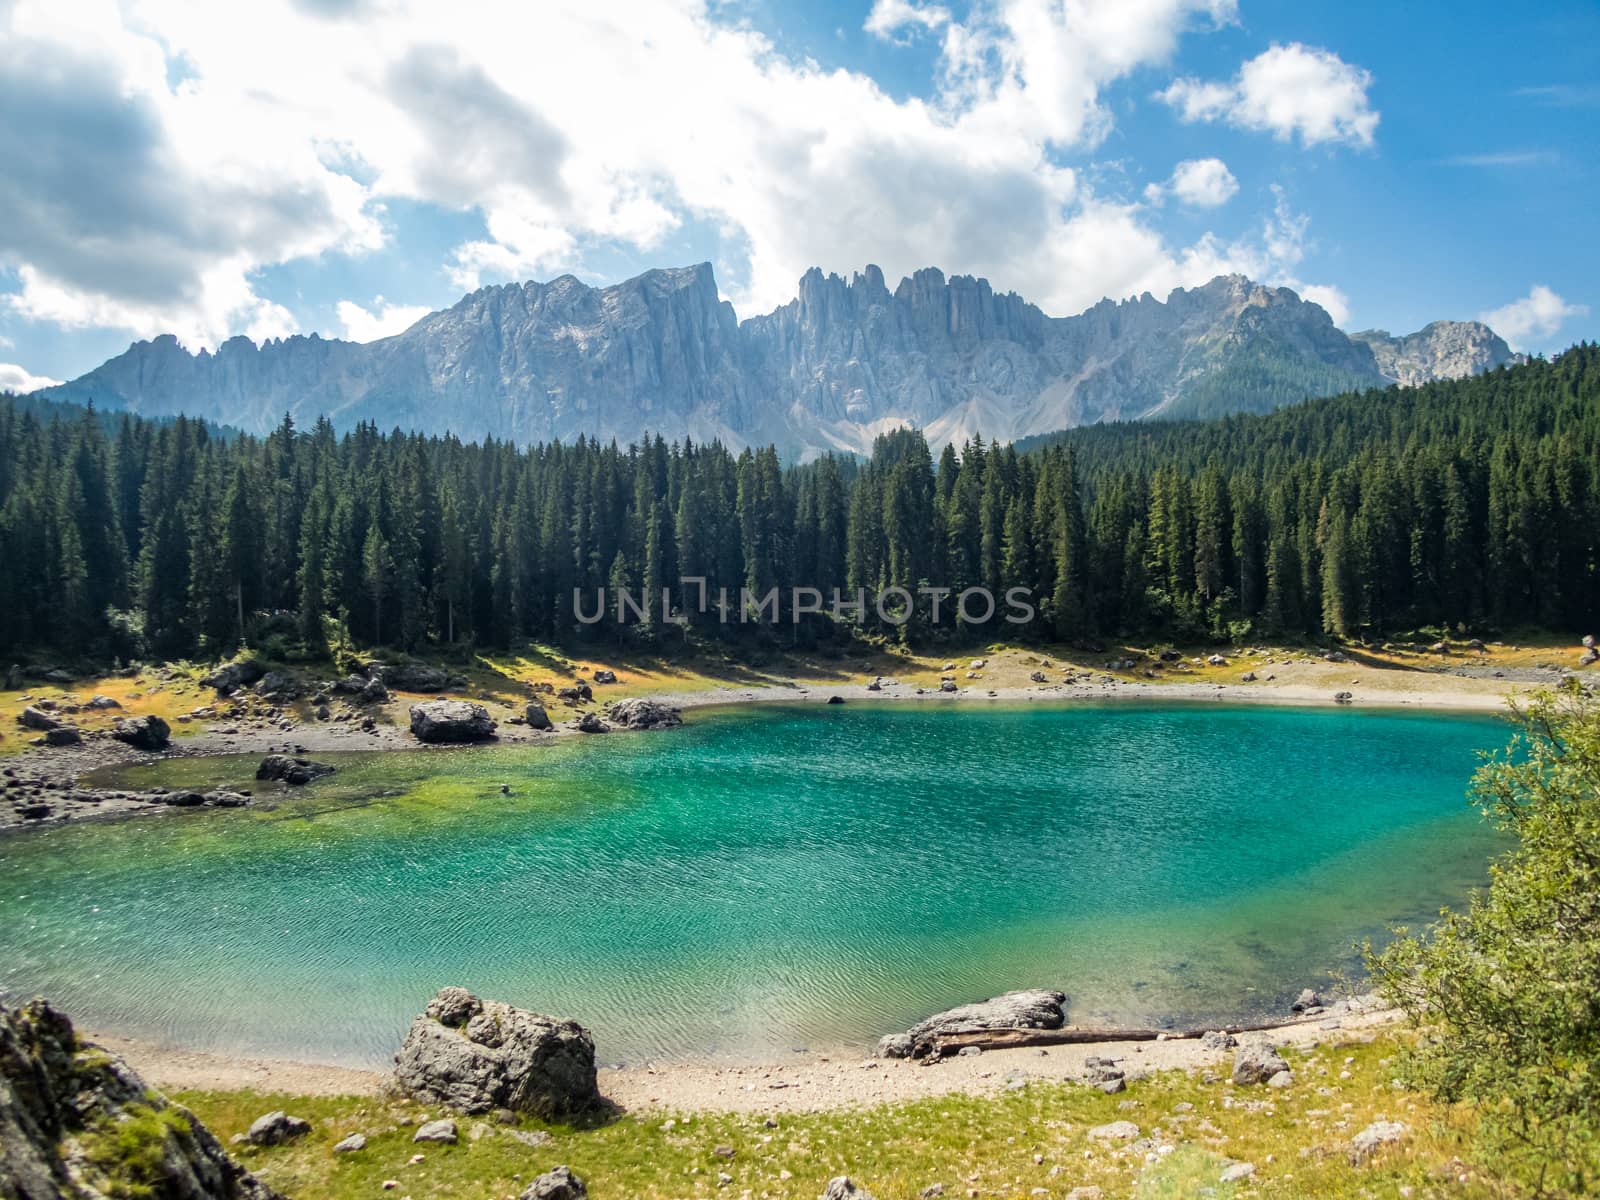 Karersee below the Karerpass at the foot of the Latemar massif by mindscapephotos